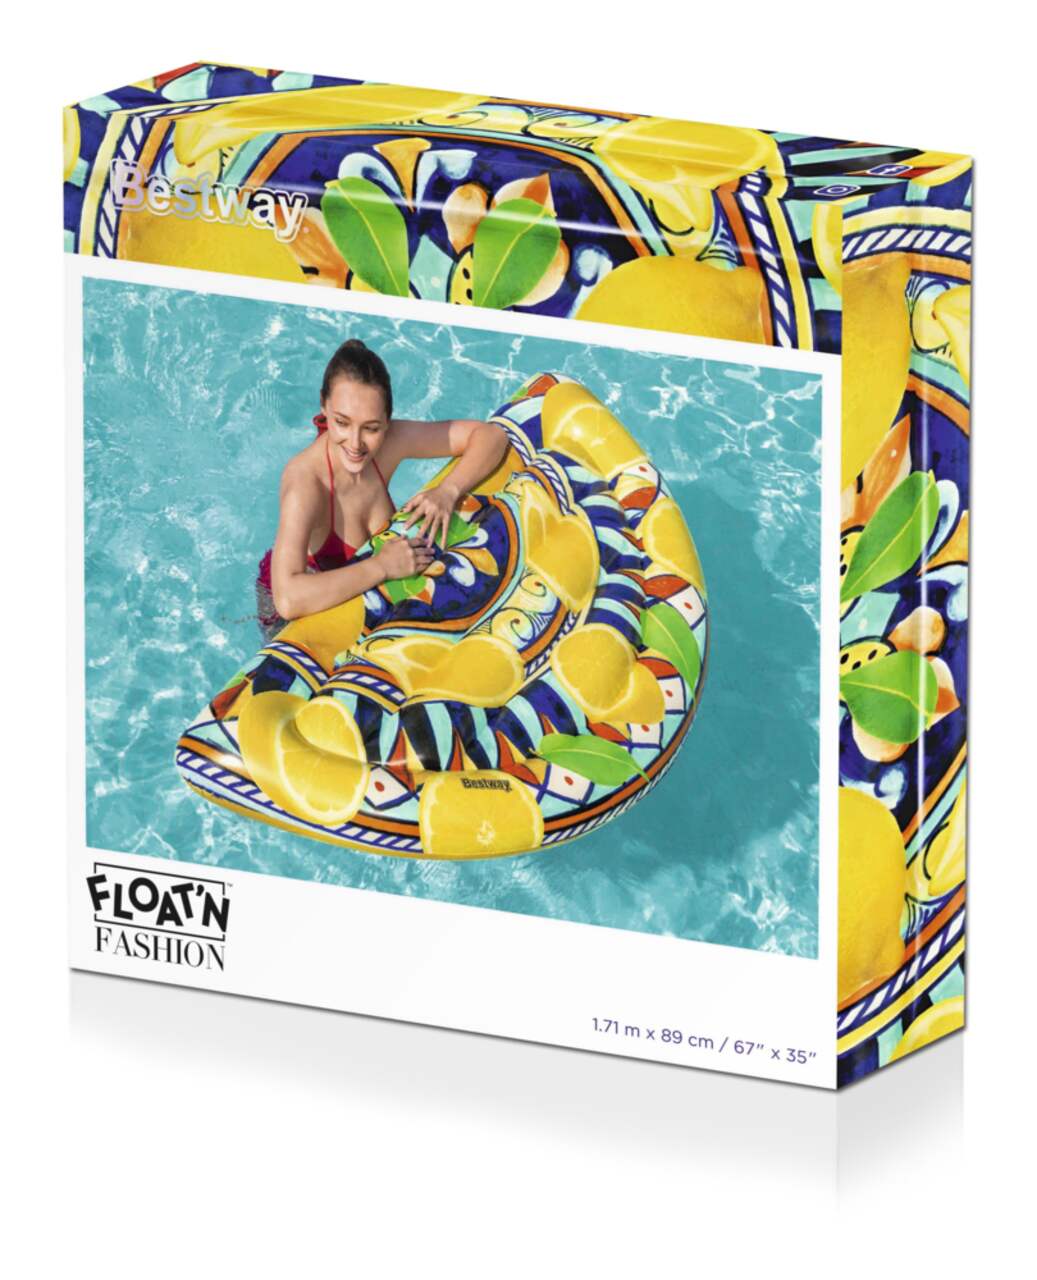 H2OGO!™ Inflatable Round Geometric Pool Swim Float/Tube, 14-in, Assorted  Colours